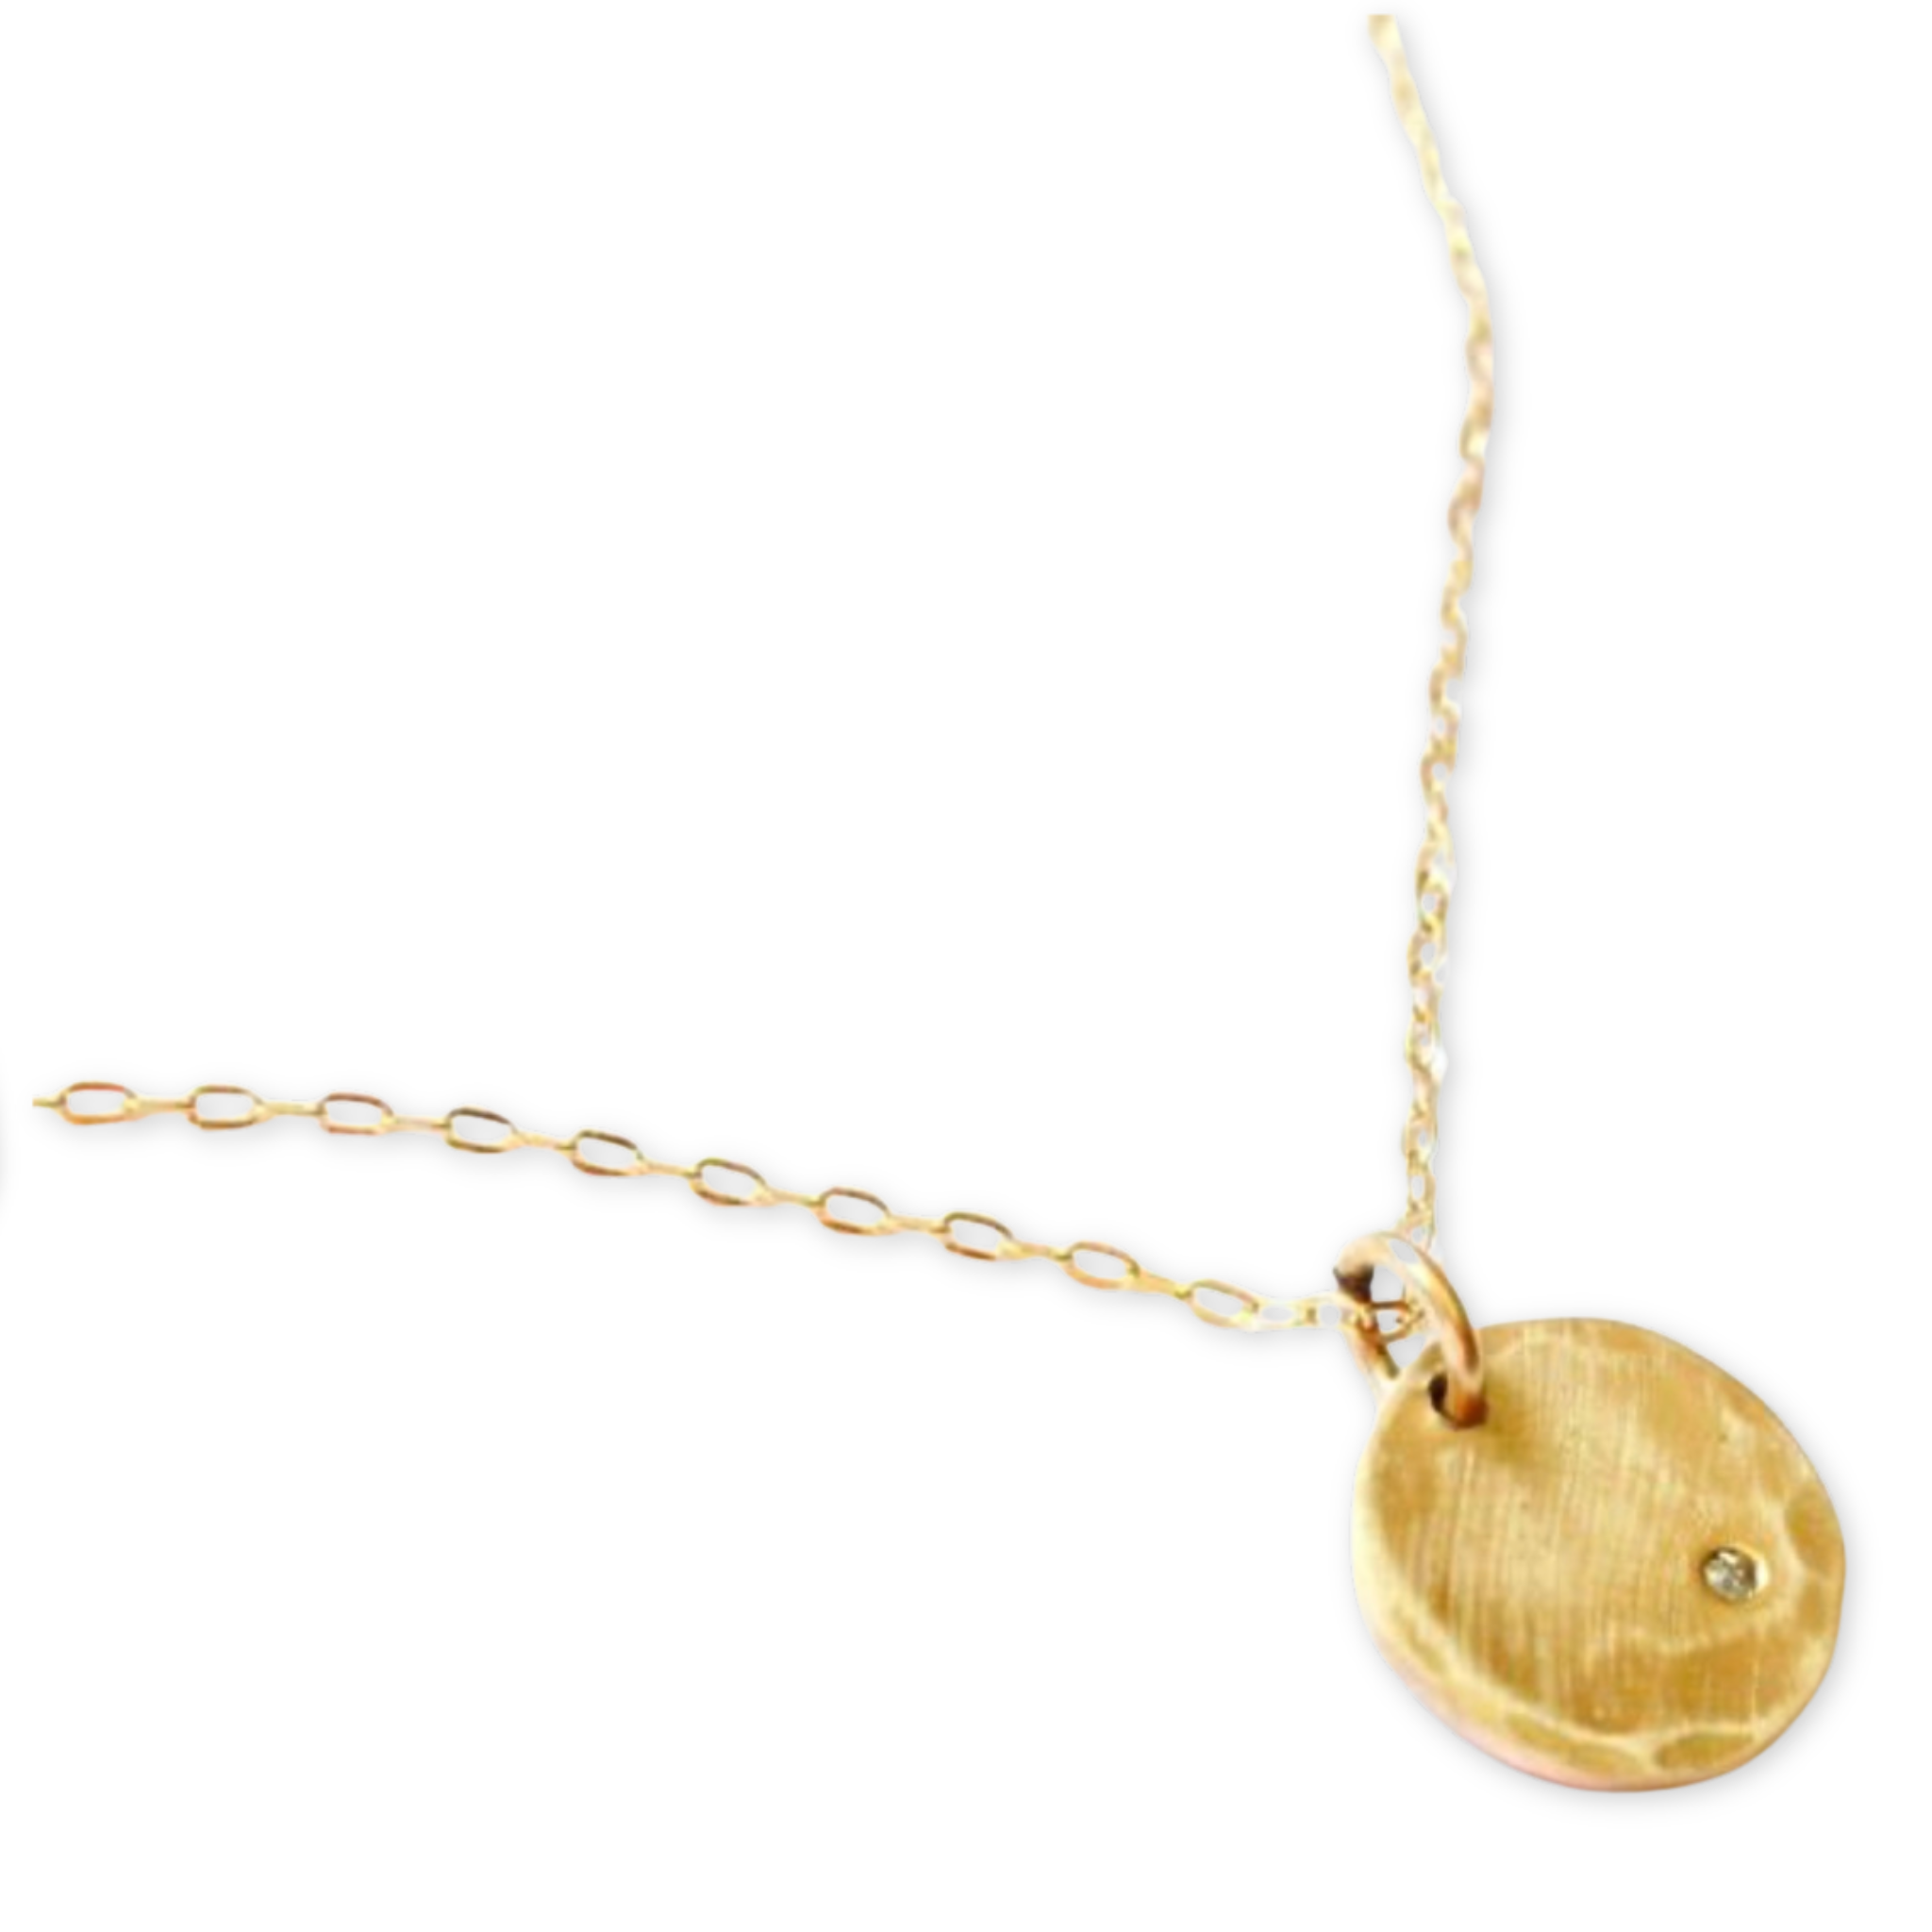 hammered round disc pendant with a tiny cubic zirconia and hanging from a delicate necklace chain